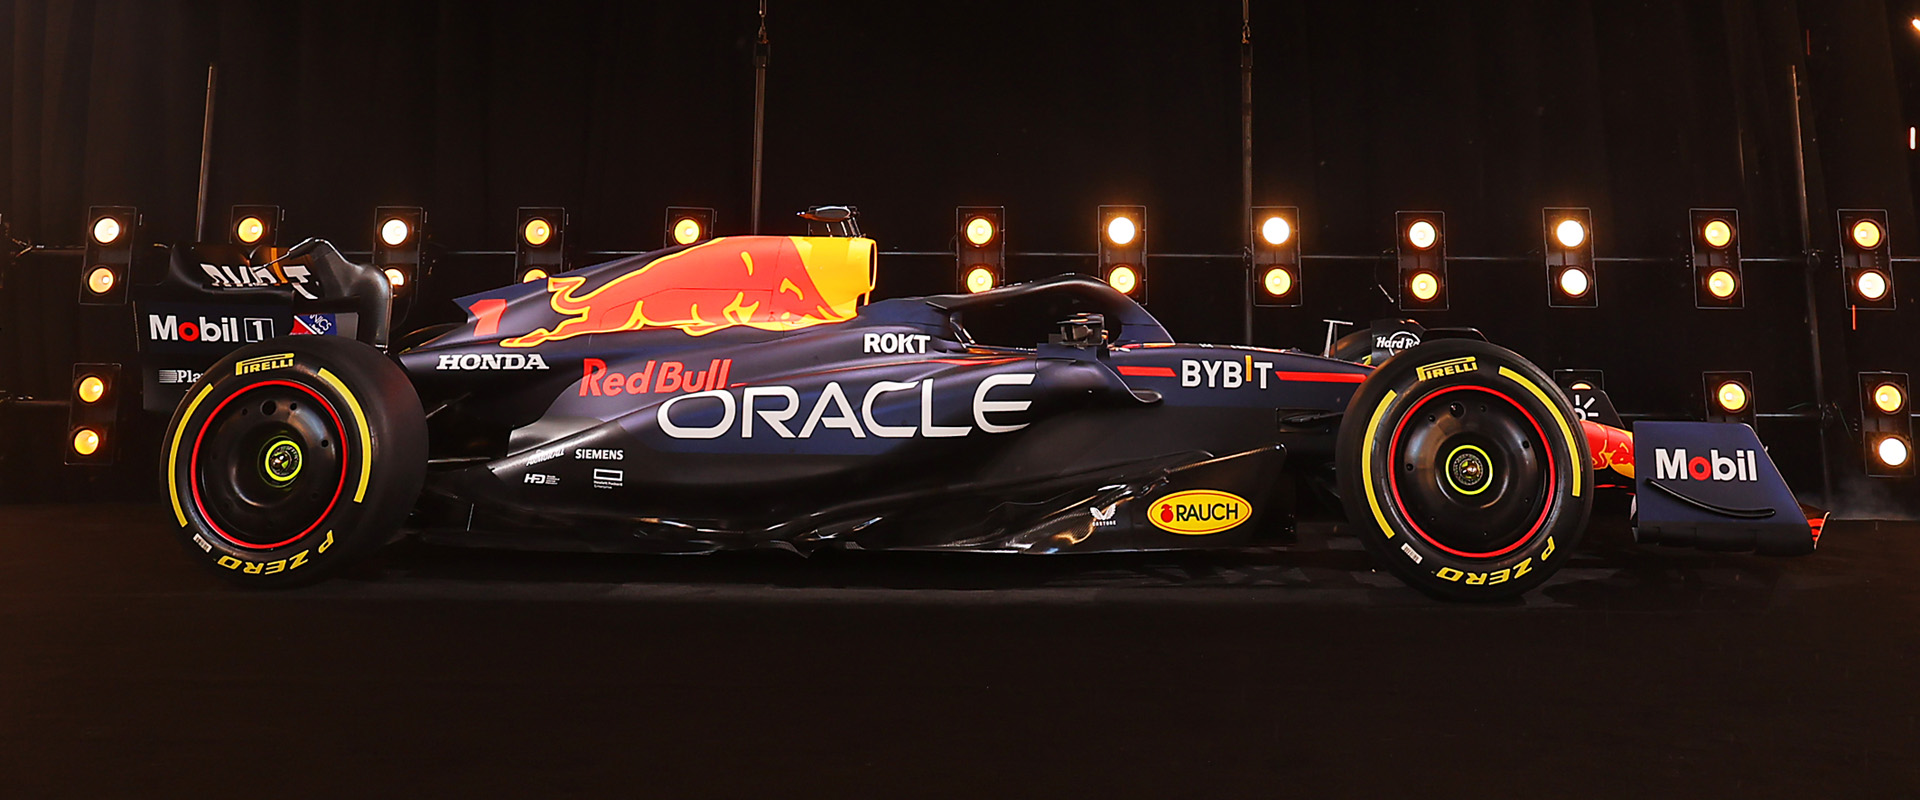 rb19 - oracle red bull racing